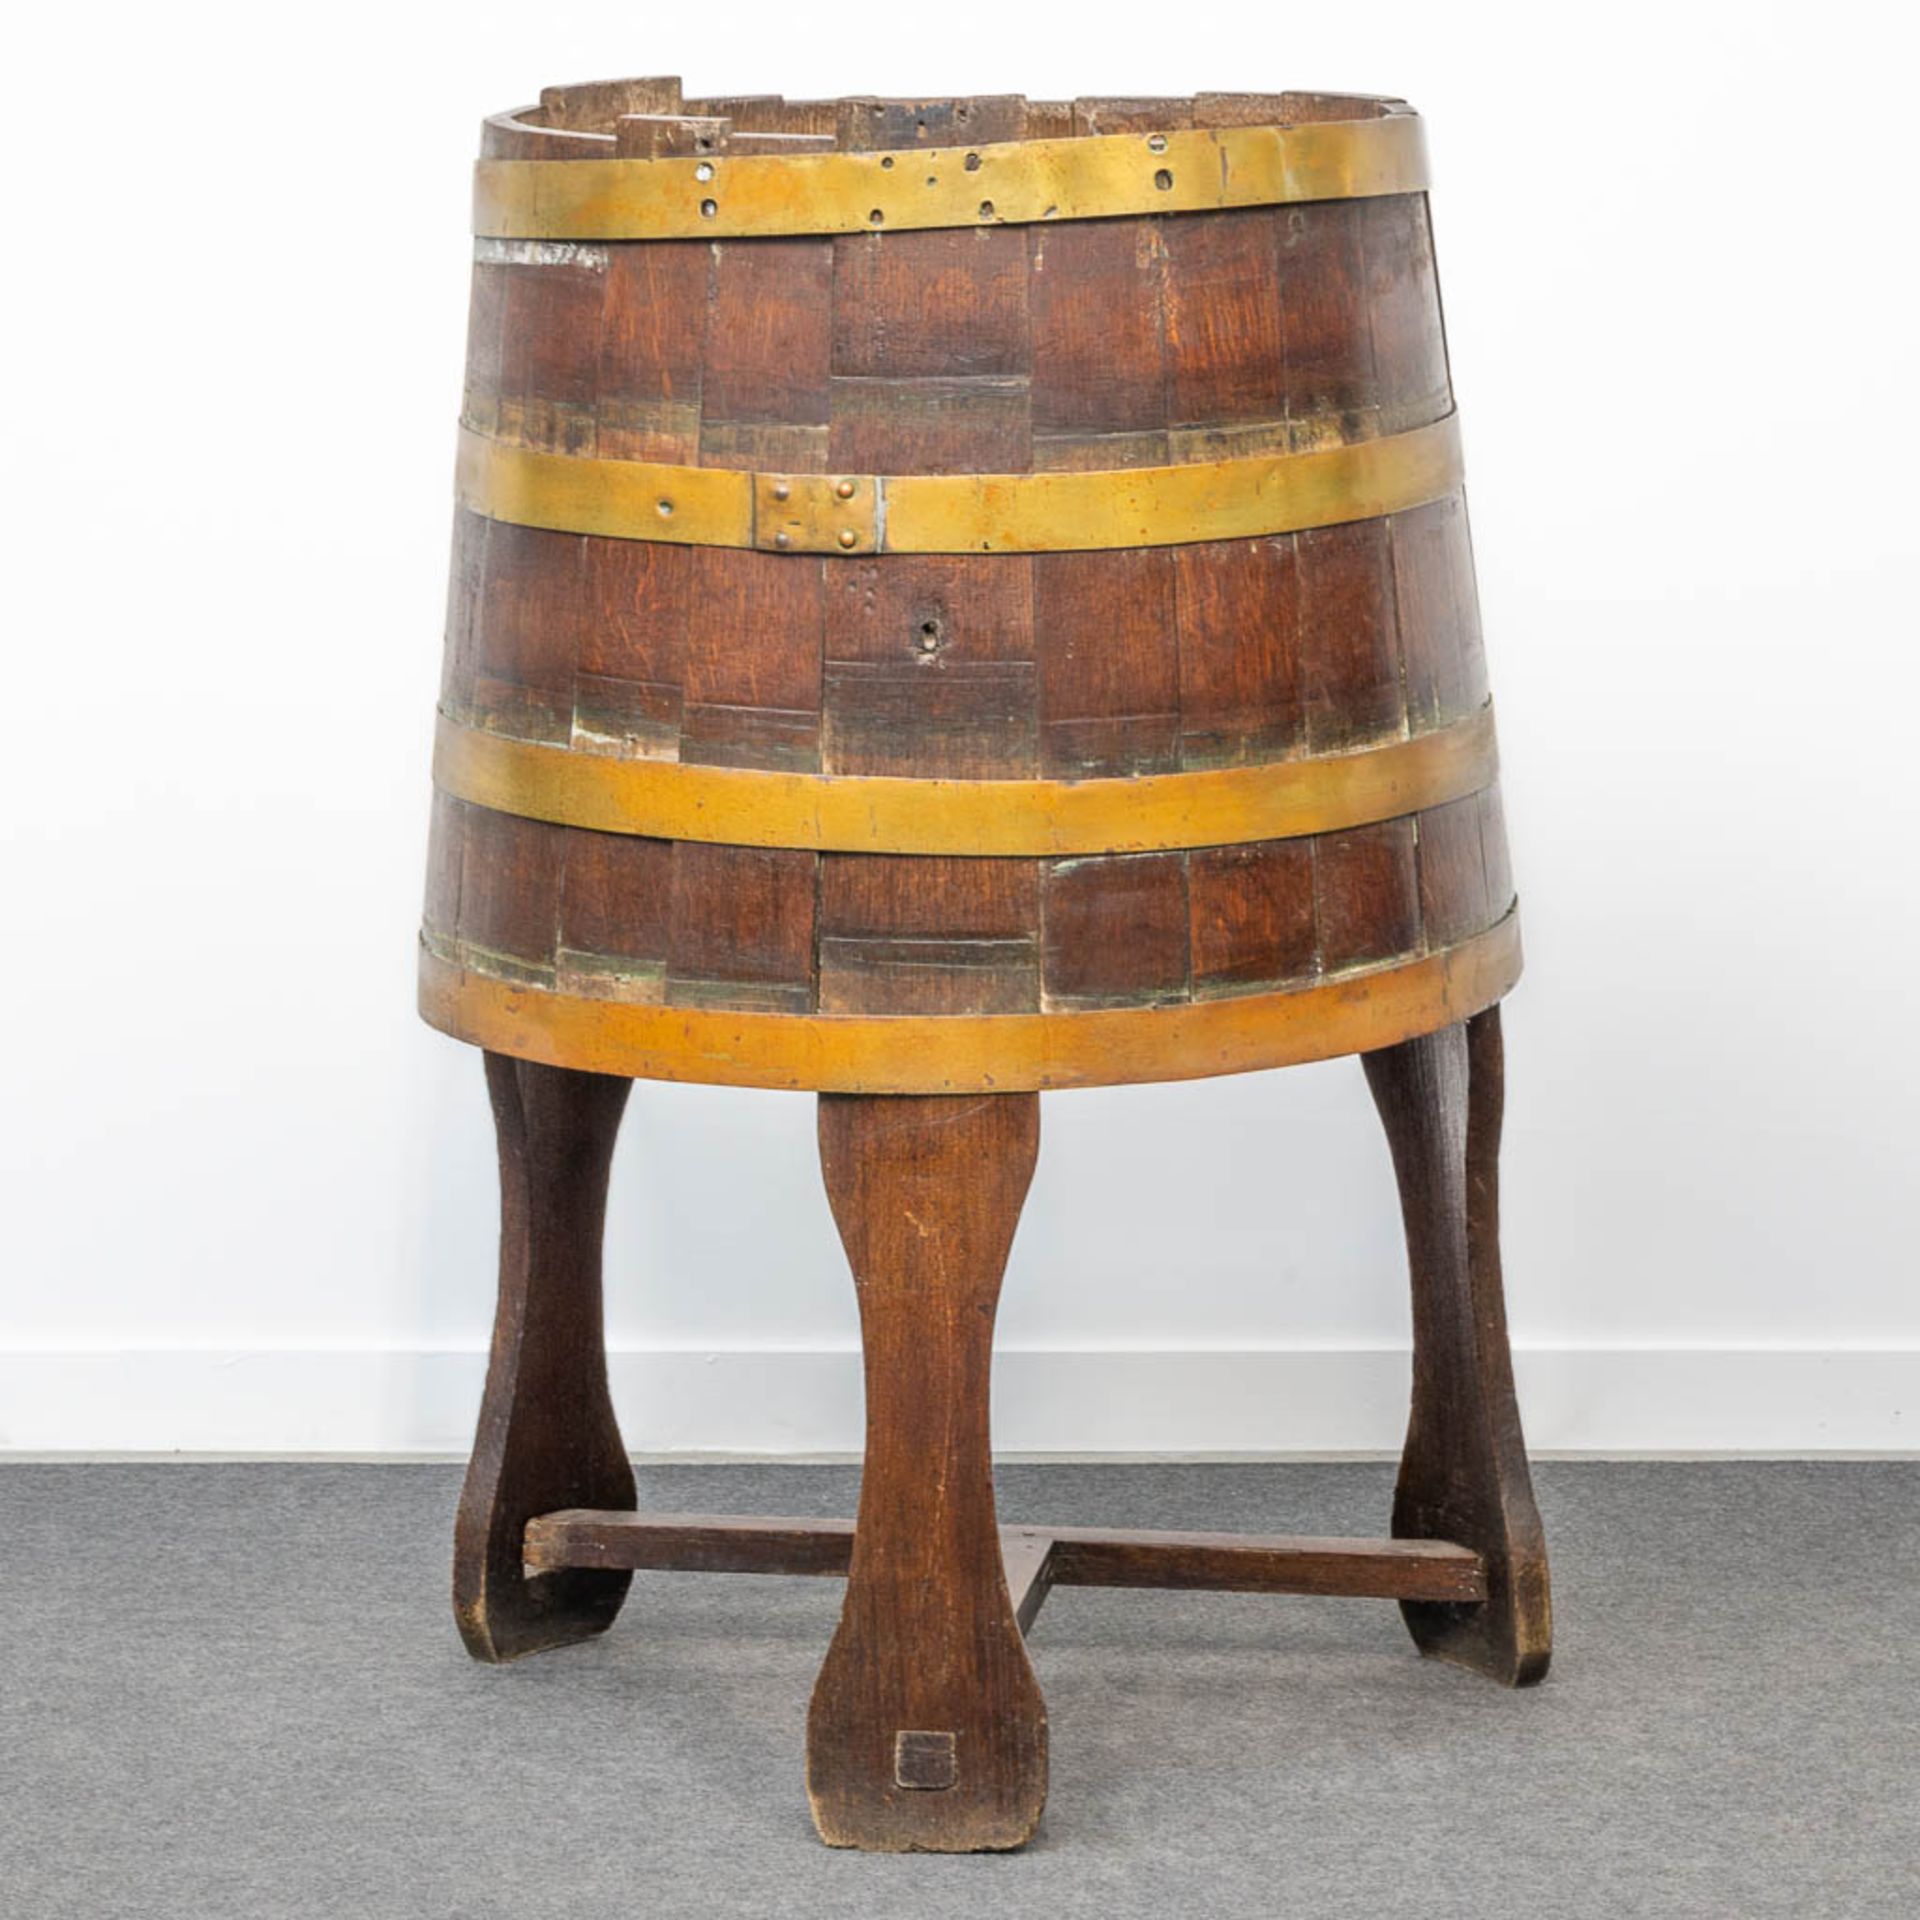 A churn standing on a base, made of oak and brass. (61 x 51 x 105 cm) - Image 2 of 6